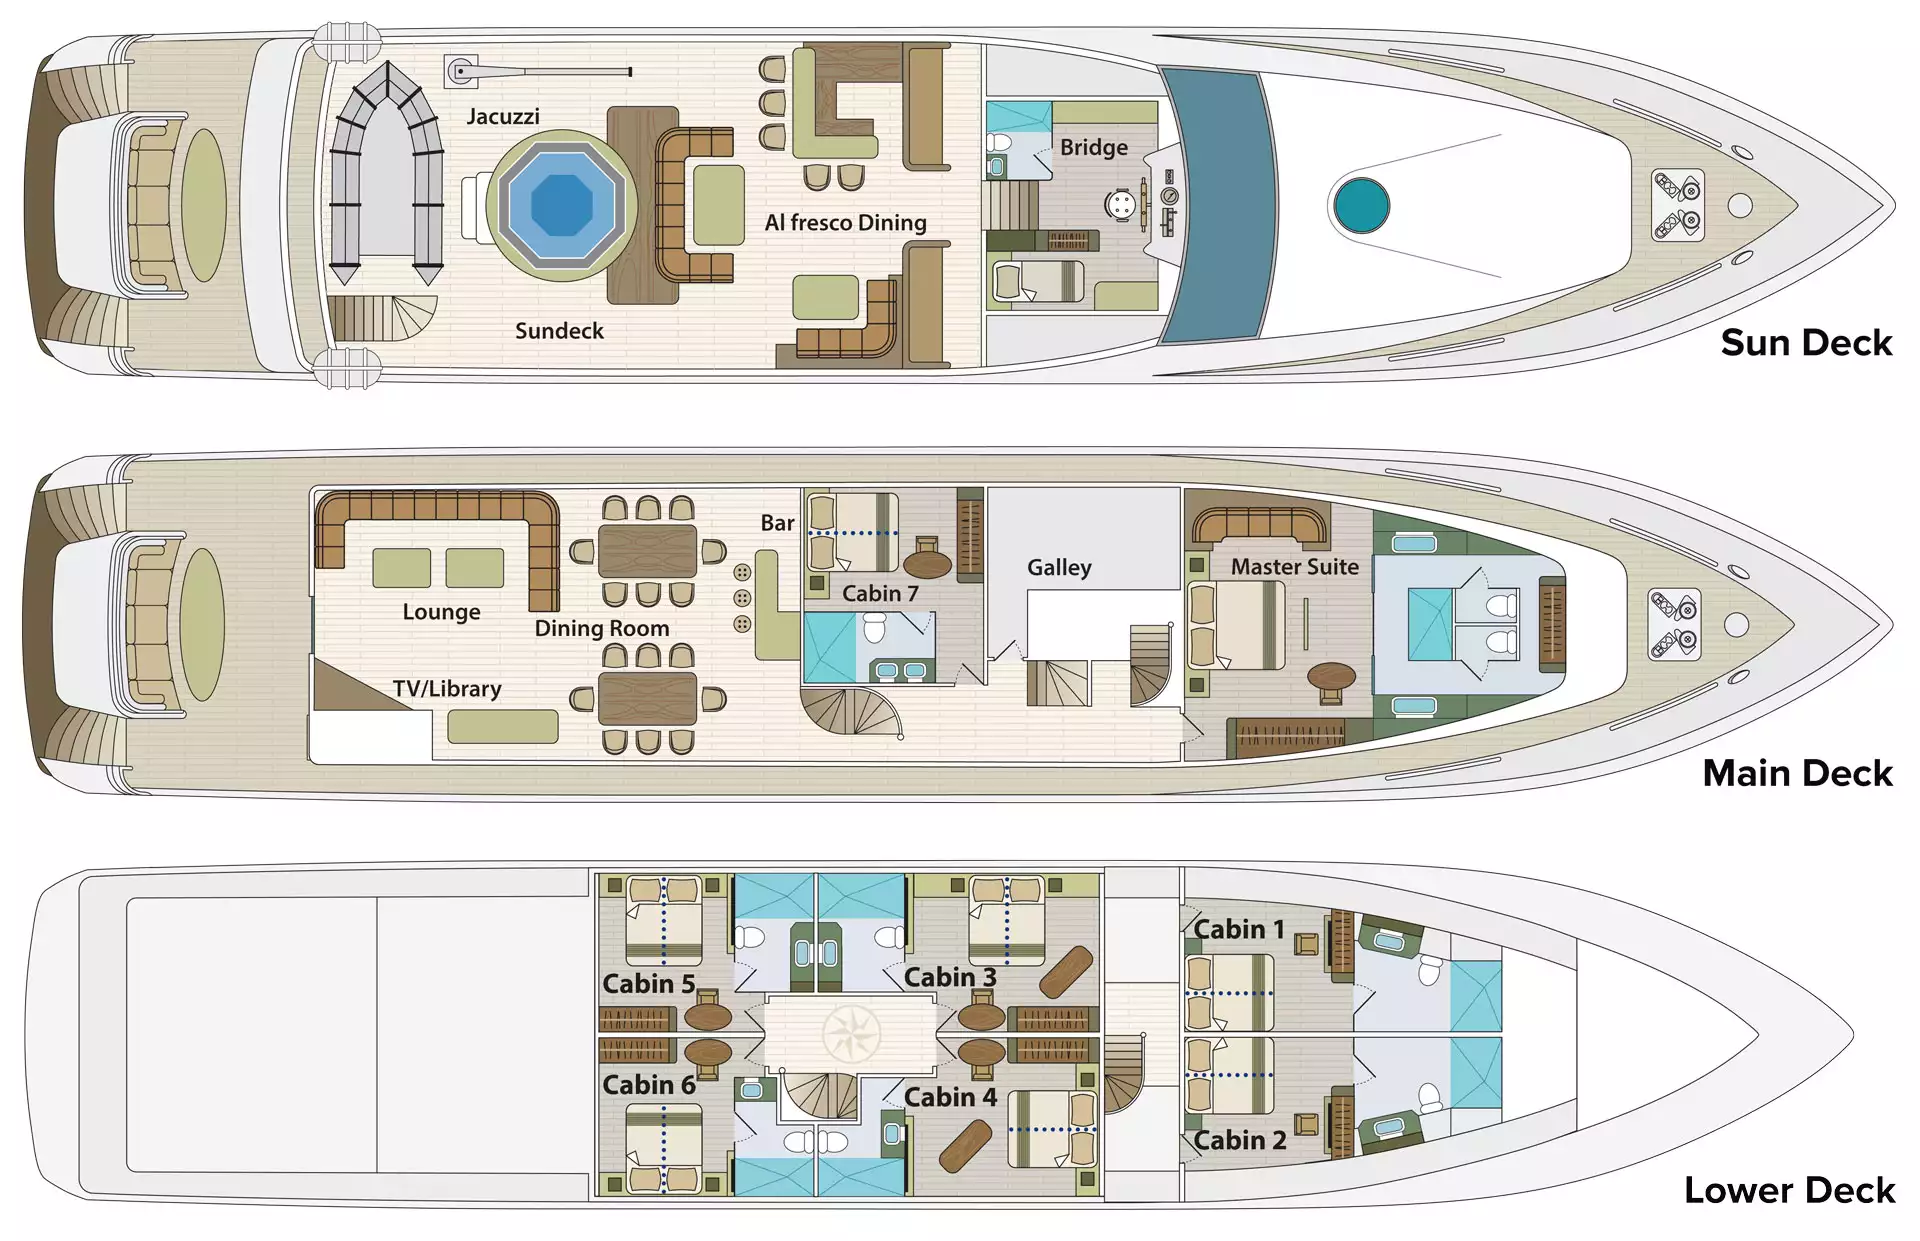 Deck plan of Grand Majestic Galapagos yacht with 3 decks, 7 staterooms & 1 master suite.